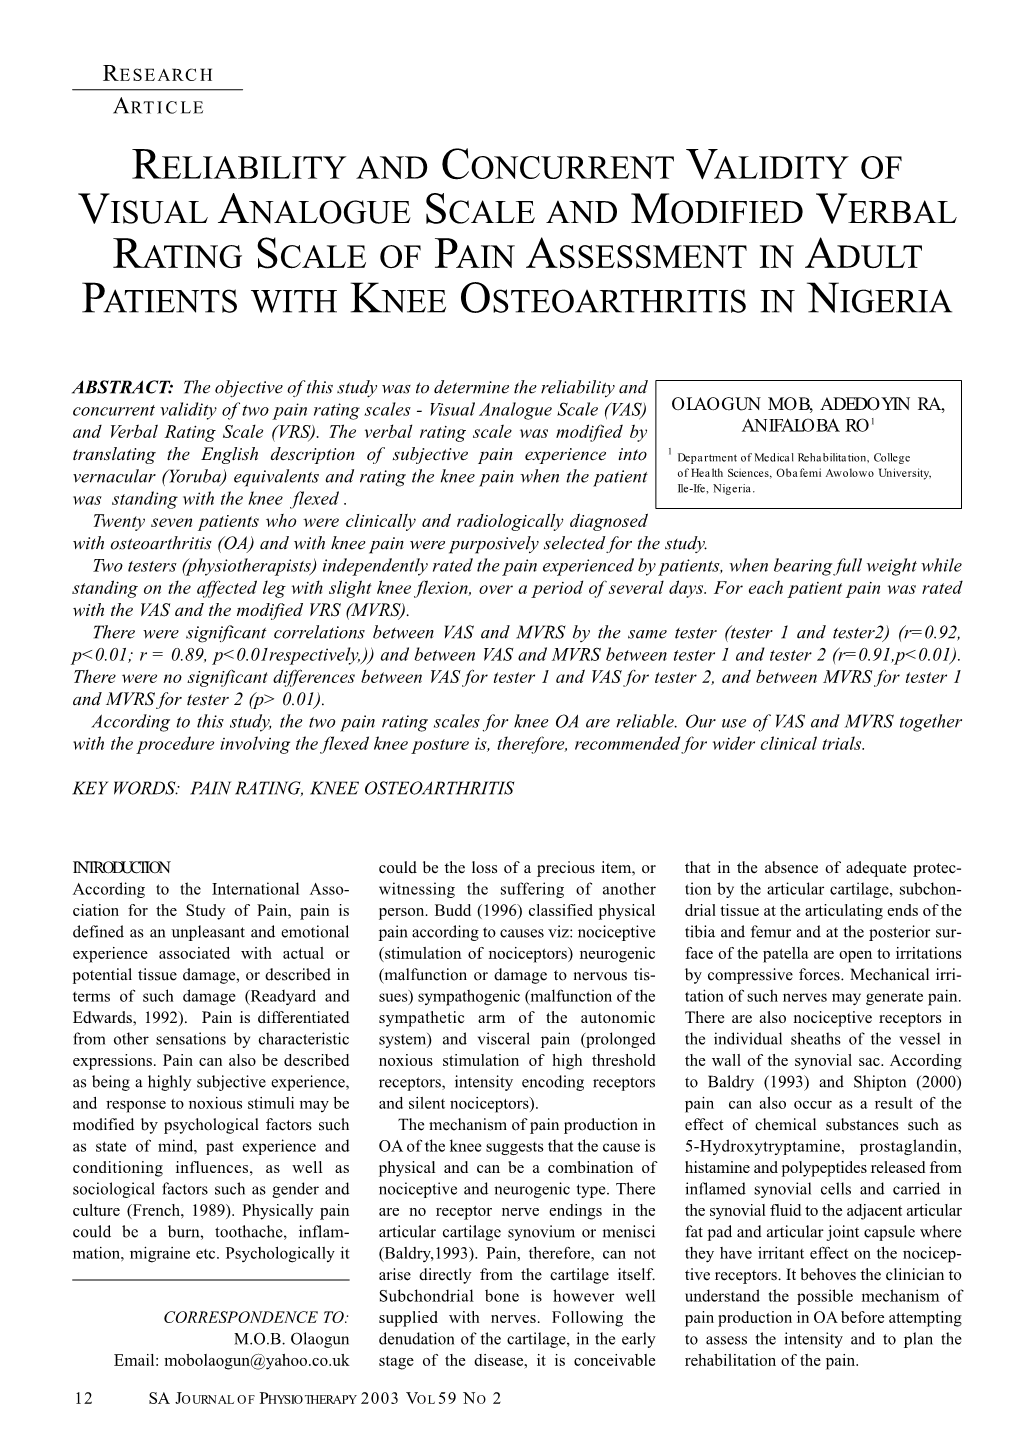 Reliability and Concurrent Validity of Visual Analogue Scale and Modified Verbal Rating Scale of Pain Assessment in Adult Patients with Knee Osteoarthritis in Nigeria